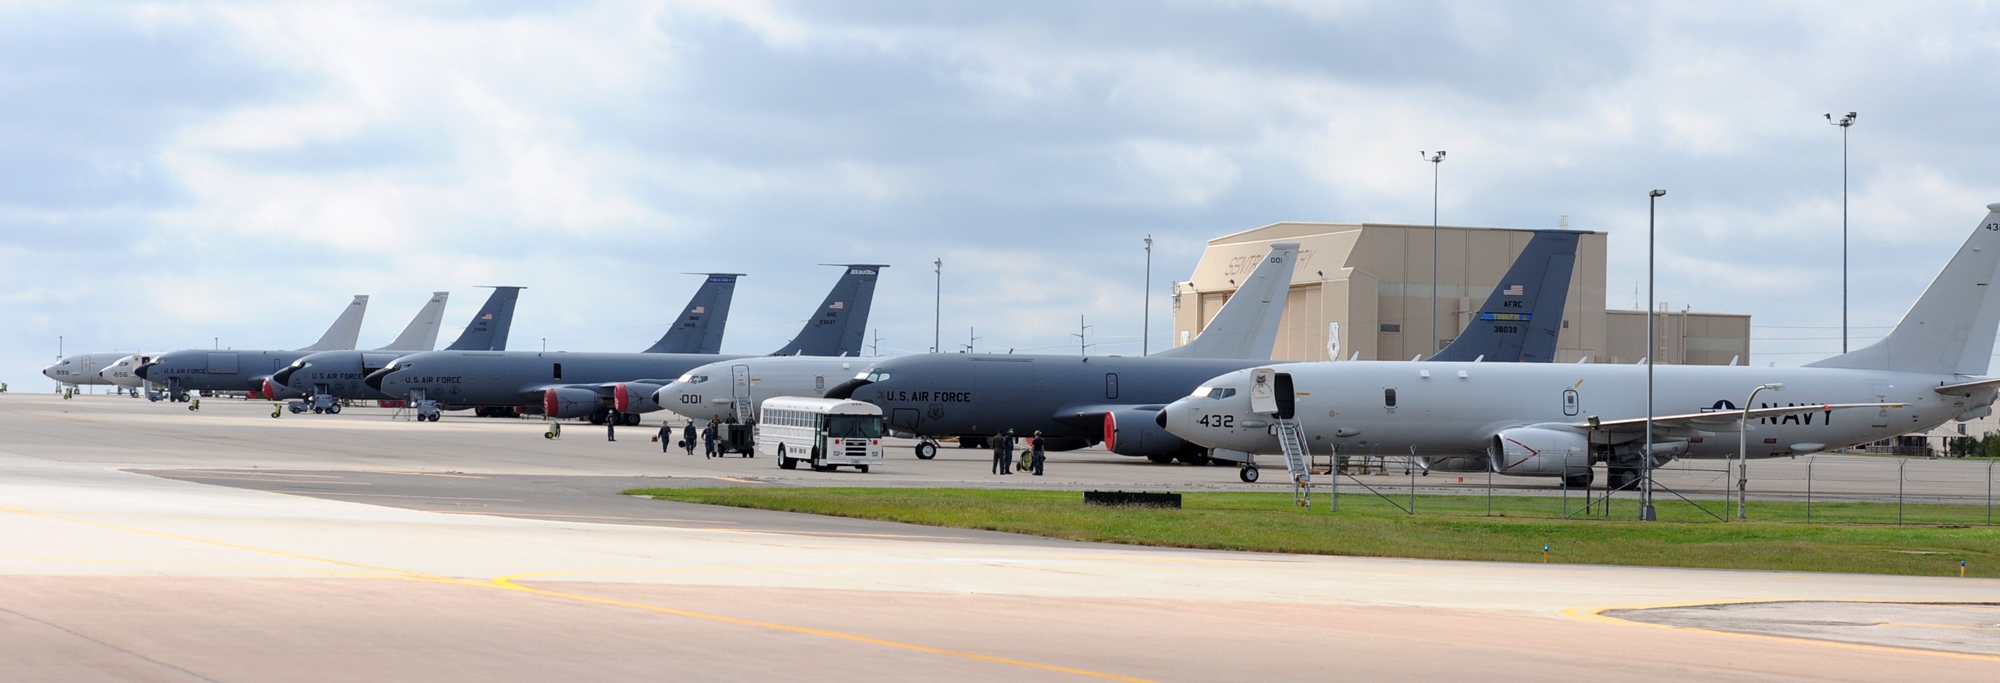   Four Navy P-8 Poseidon aircraft from Naval Air Station Jacksonville, Florida, line up with Air Force KC-135 Stratotankers on Tinker Air Force Base’s flightline. Air Force photo by April McDonald.